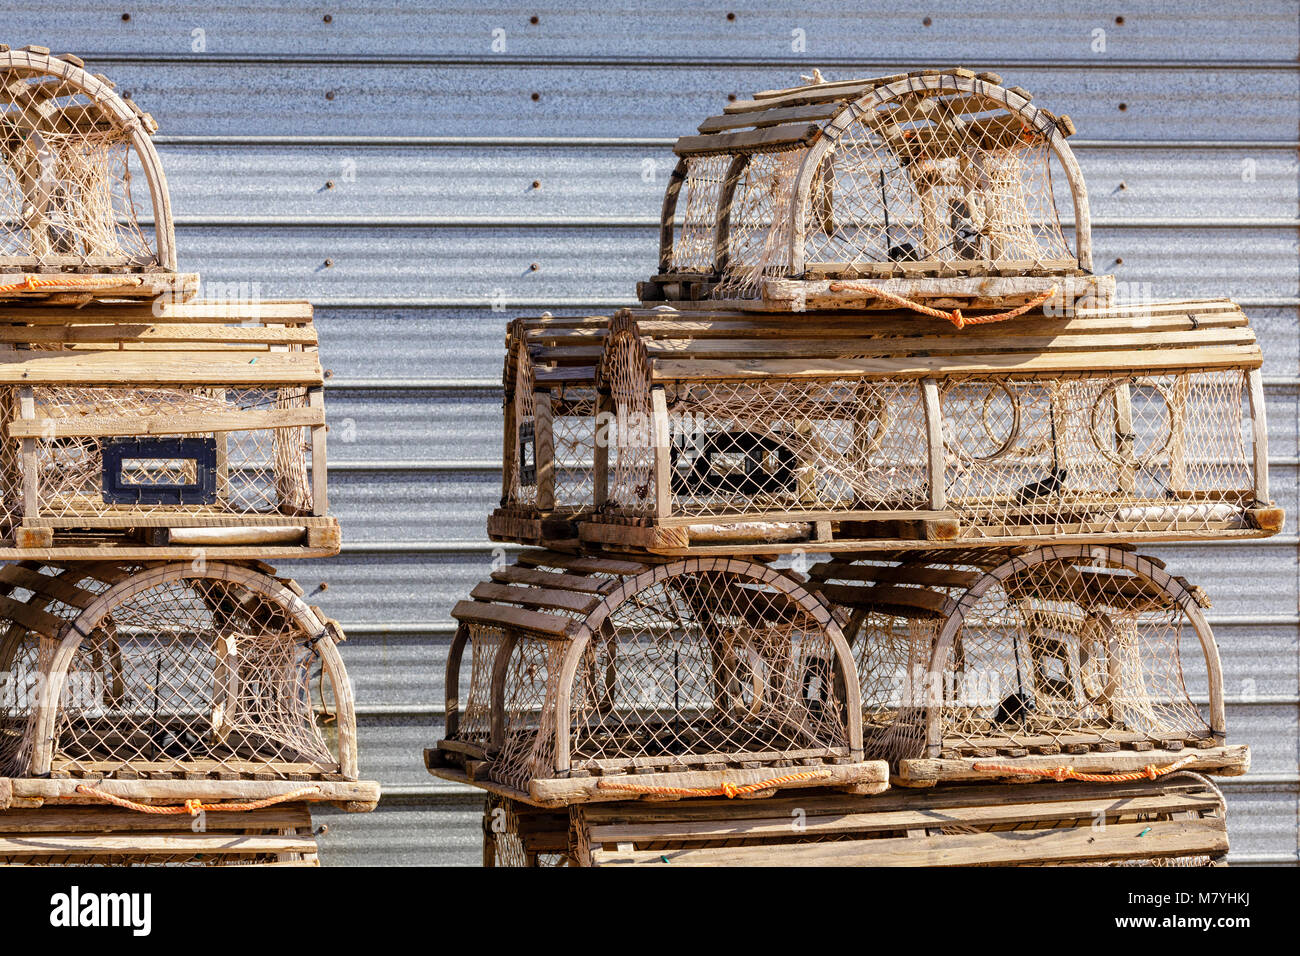 Lobster Traps on a dock in Newfoundland. Stock Photo